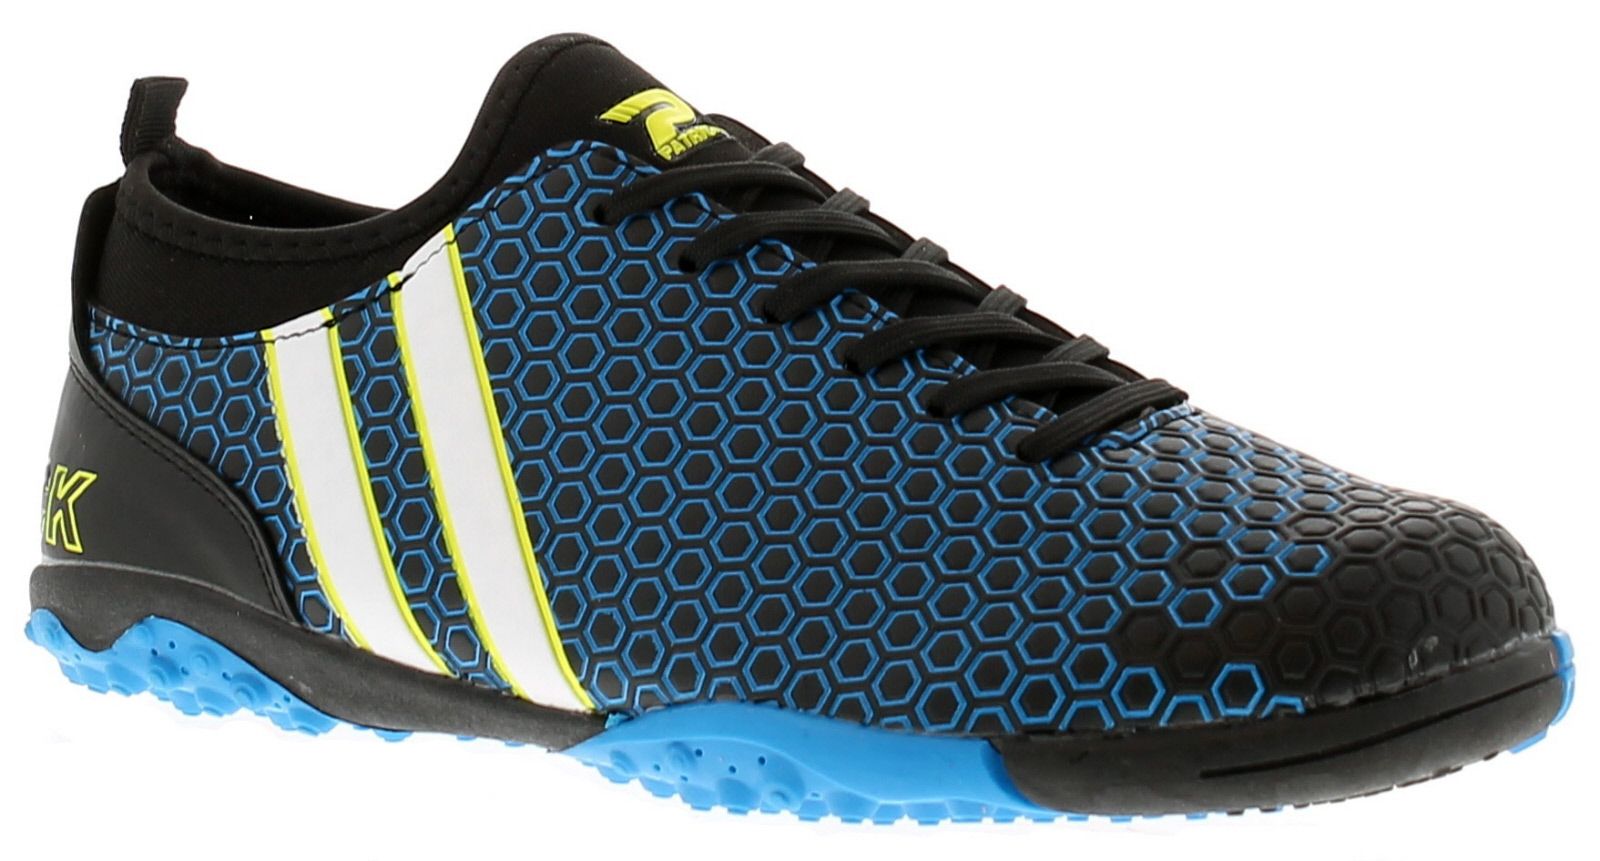 Patrick Baggio Older Boys Astro Turf Trainers Blue. Manmade Upper. Manmade Lining. Synthetic Sole. Boys Junior Astro Turf Football Boots Lace Up.